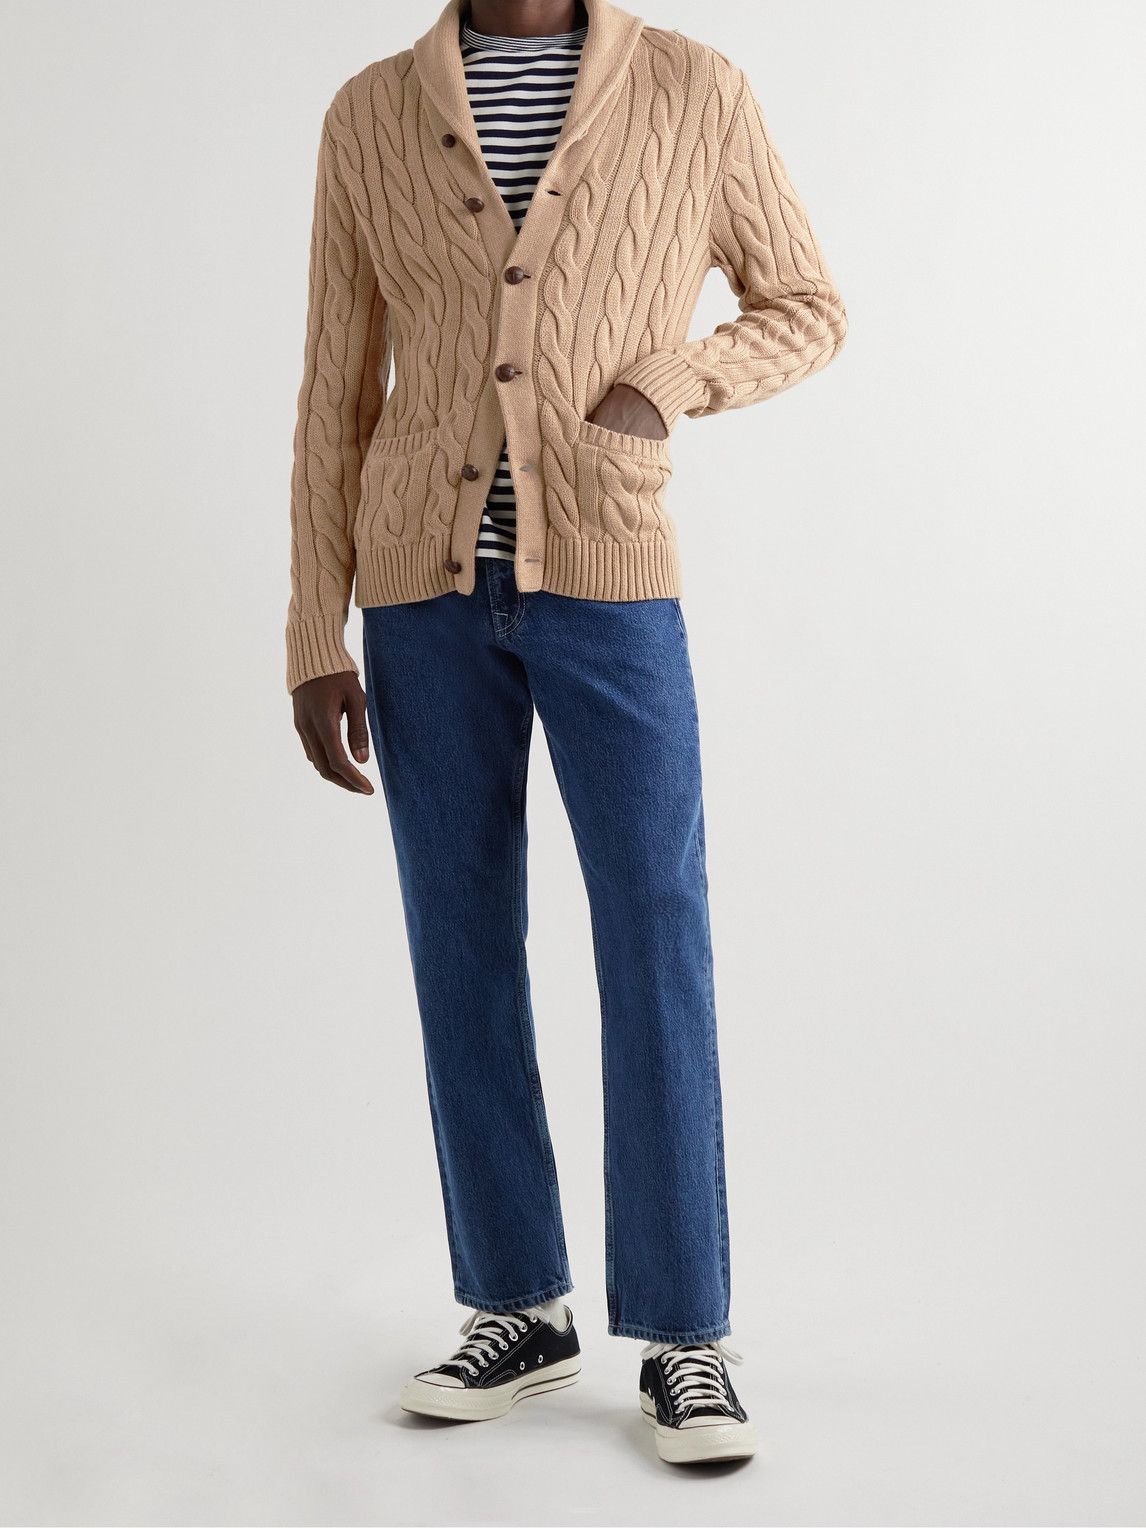 Polo Ralph Lauren - Shawl-Collar Cable-Knit Cotton and Cashmere-Blend Cardigan - Brown